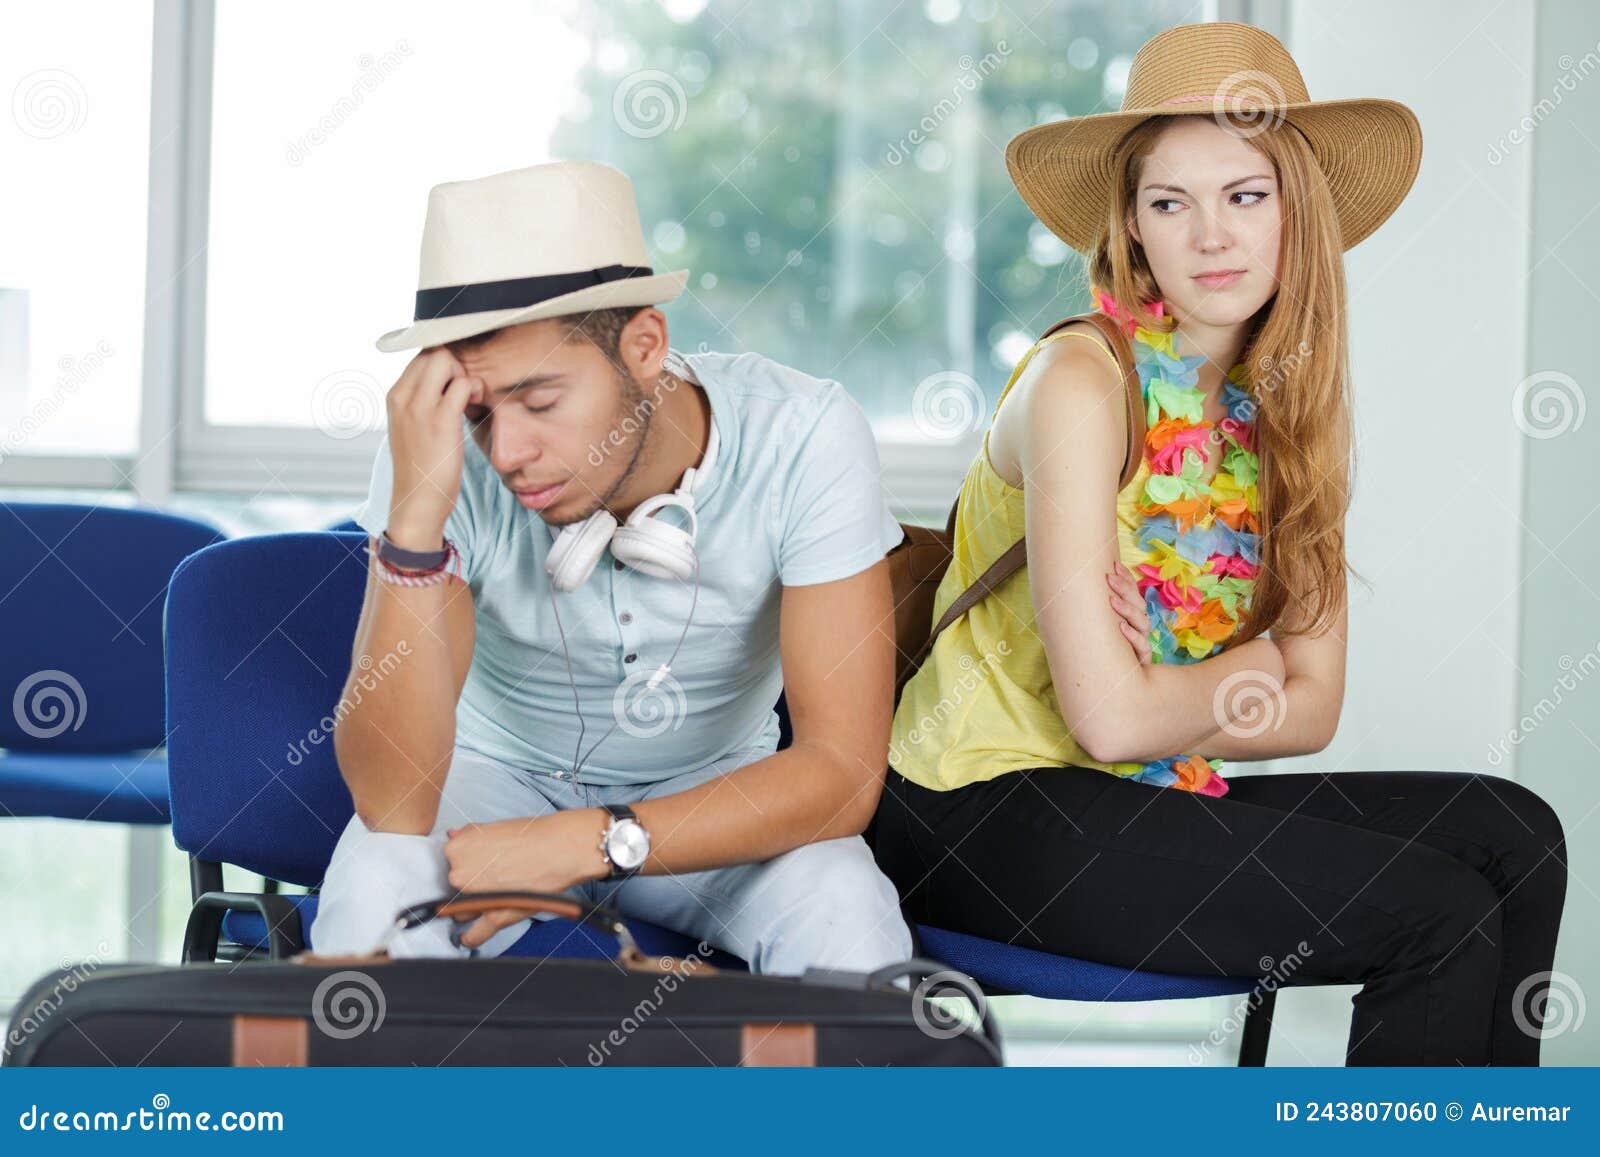 frustrated couple waiting in airport lounge